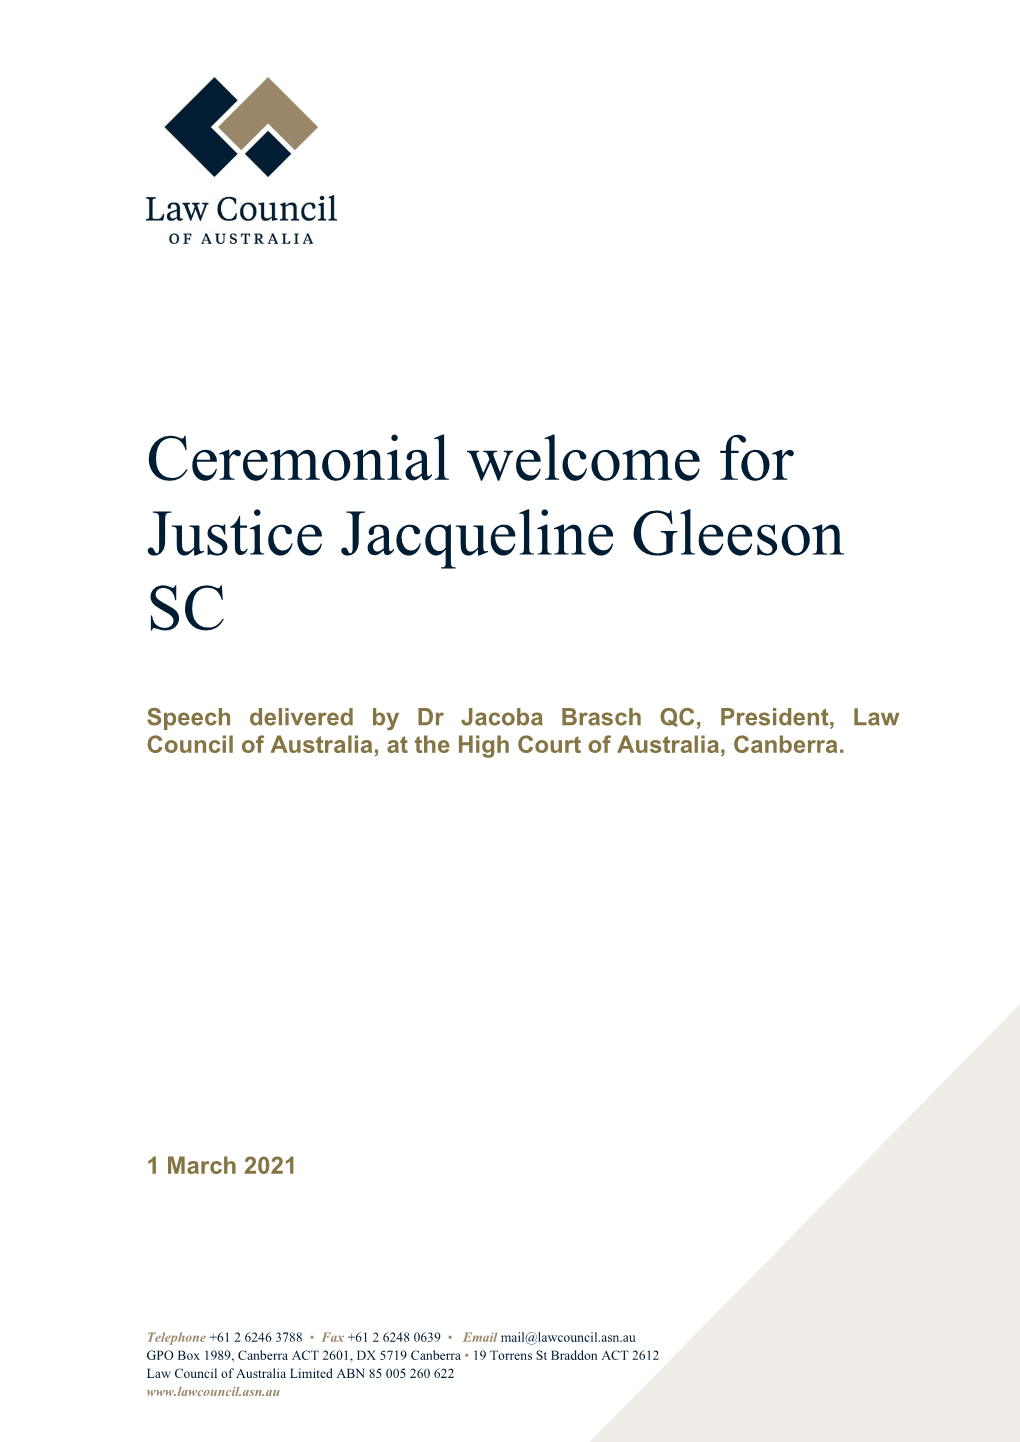 Ceremonial Welcome for Justice Jacqueline Gleeson SC